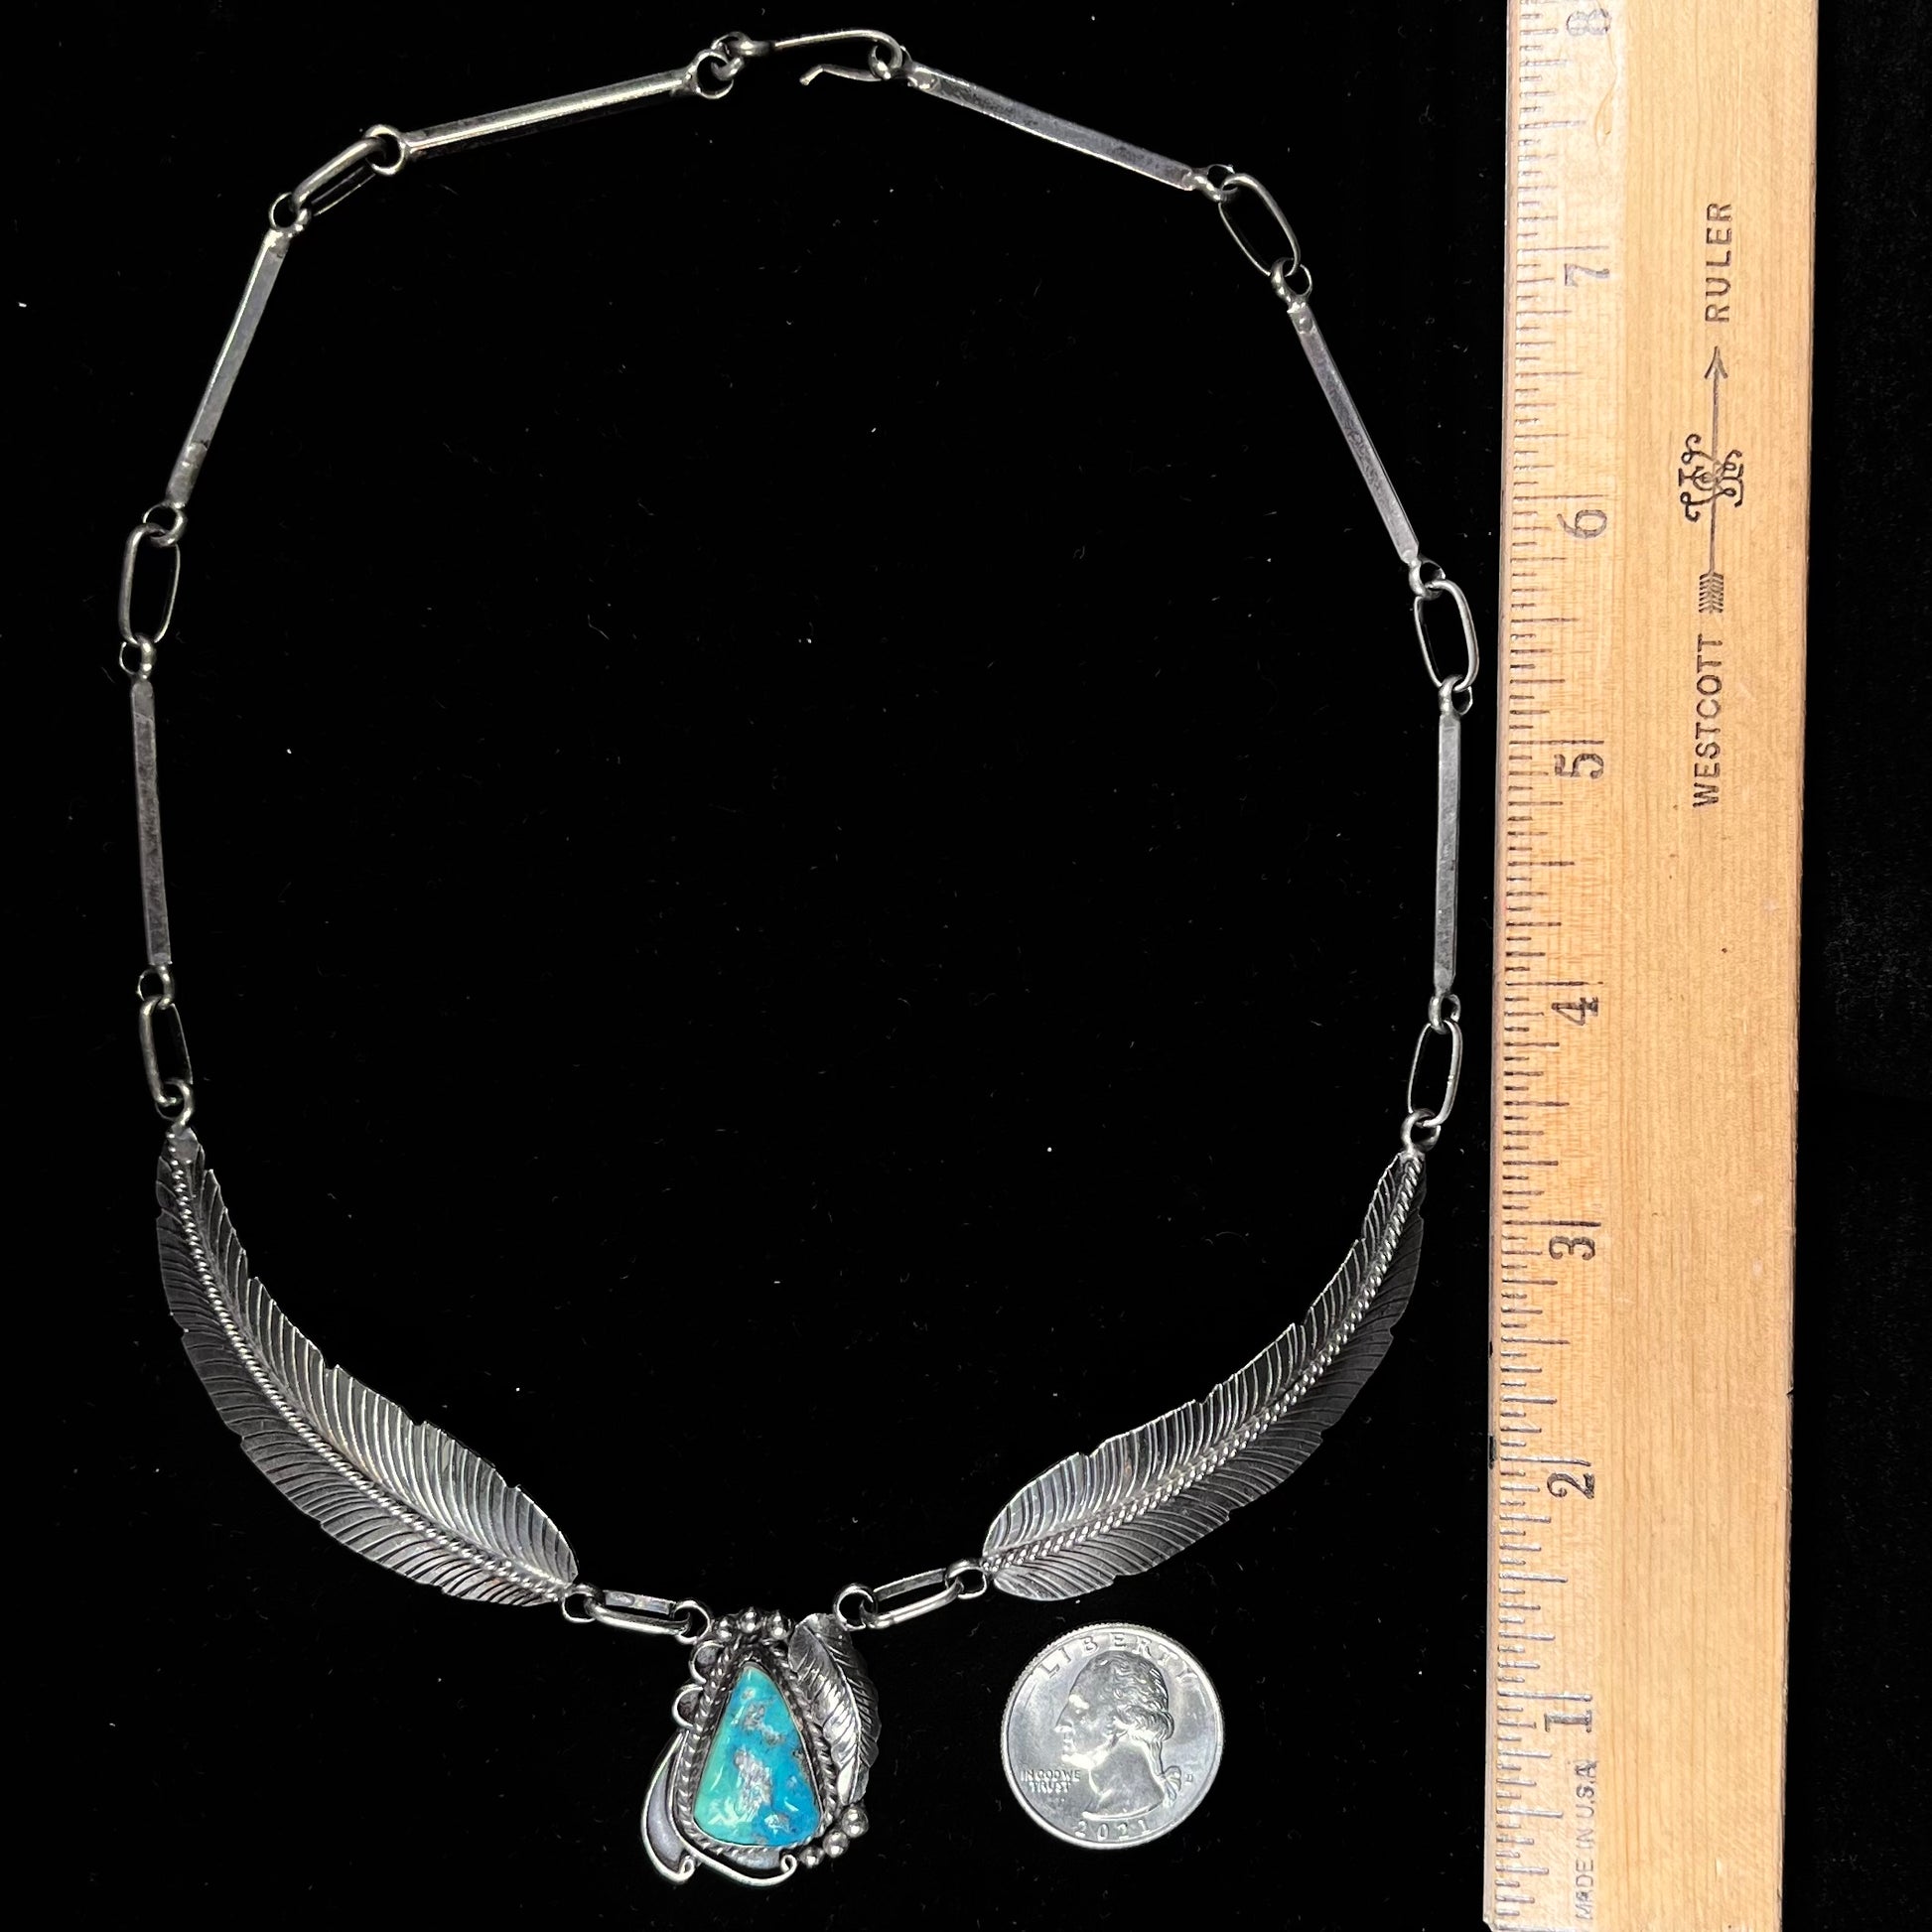 A sterling silver feather motif necklace set with a Sleeping Beauty turquoise stone, handmade by Navajo artist, Jameson Lee.